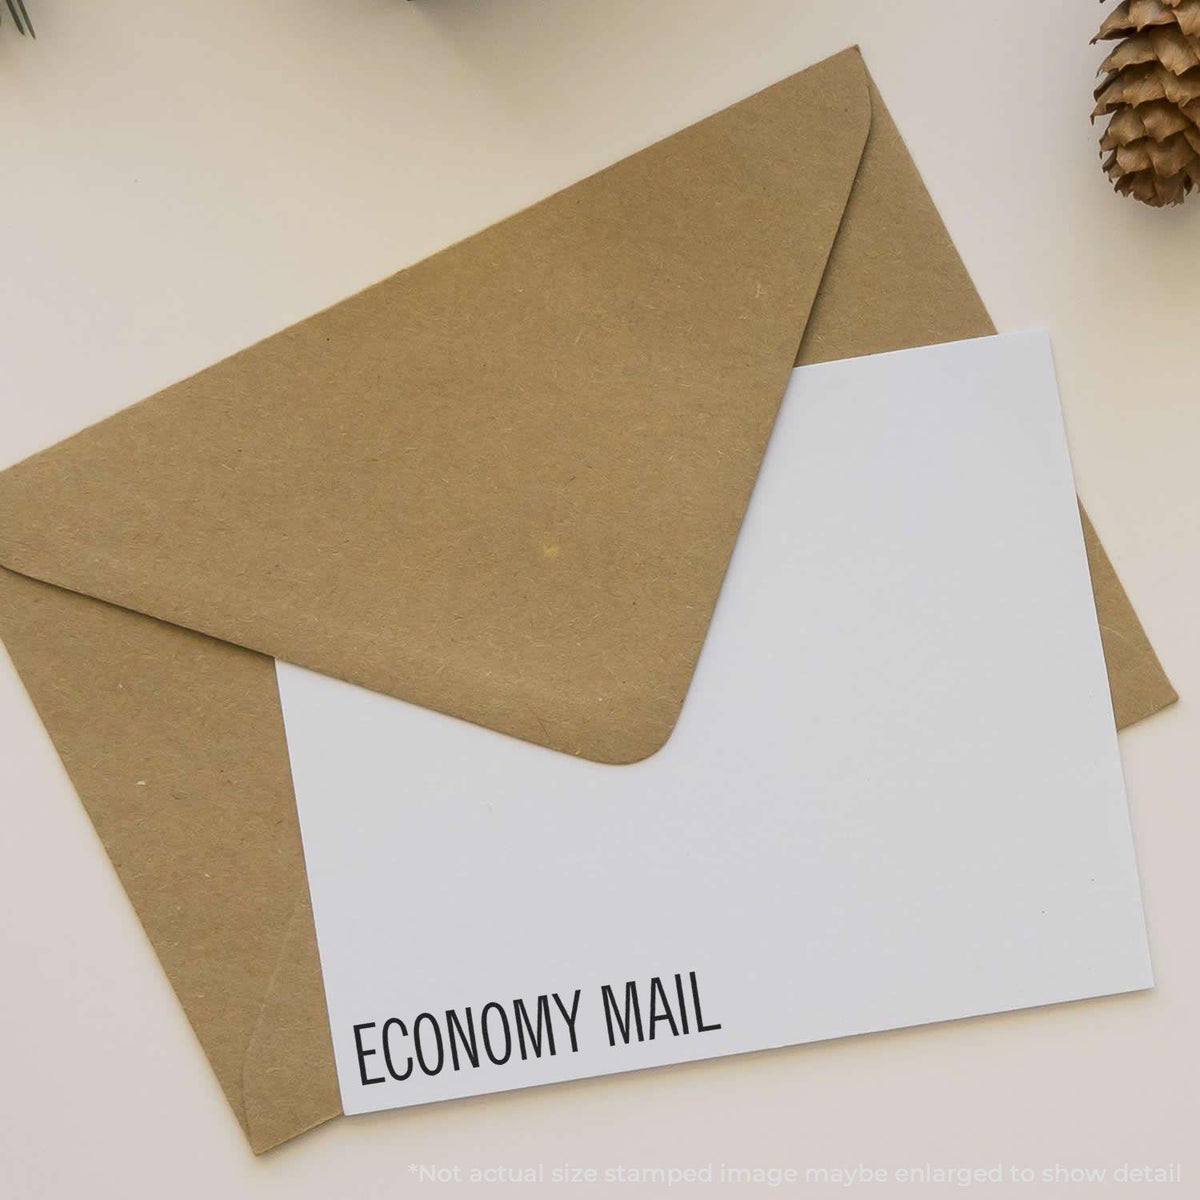 Economy Mail Rubber Stamp In Use Photo